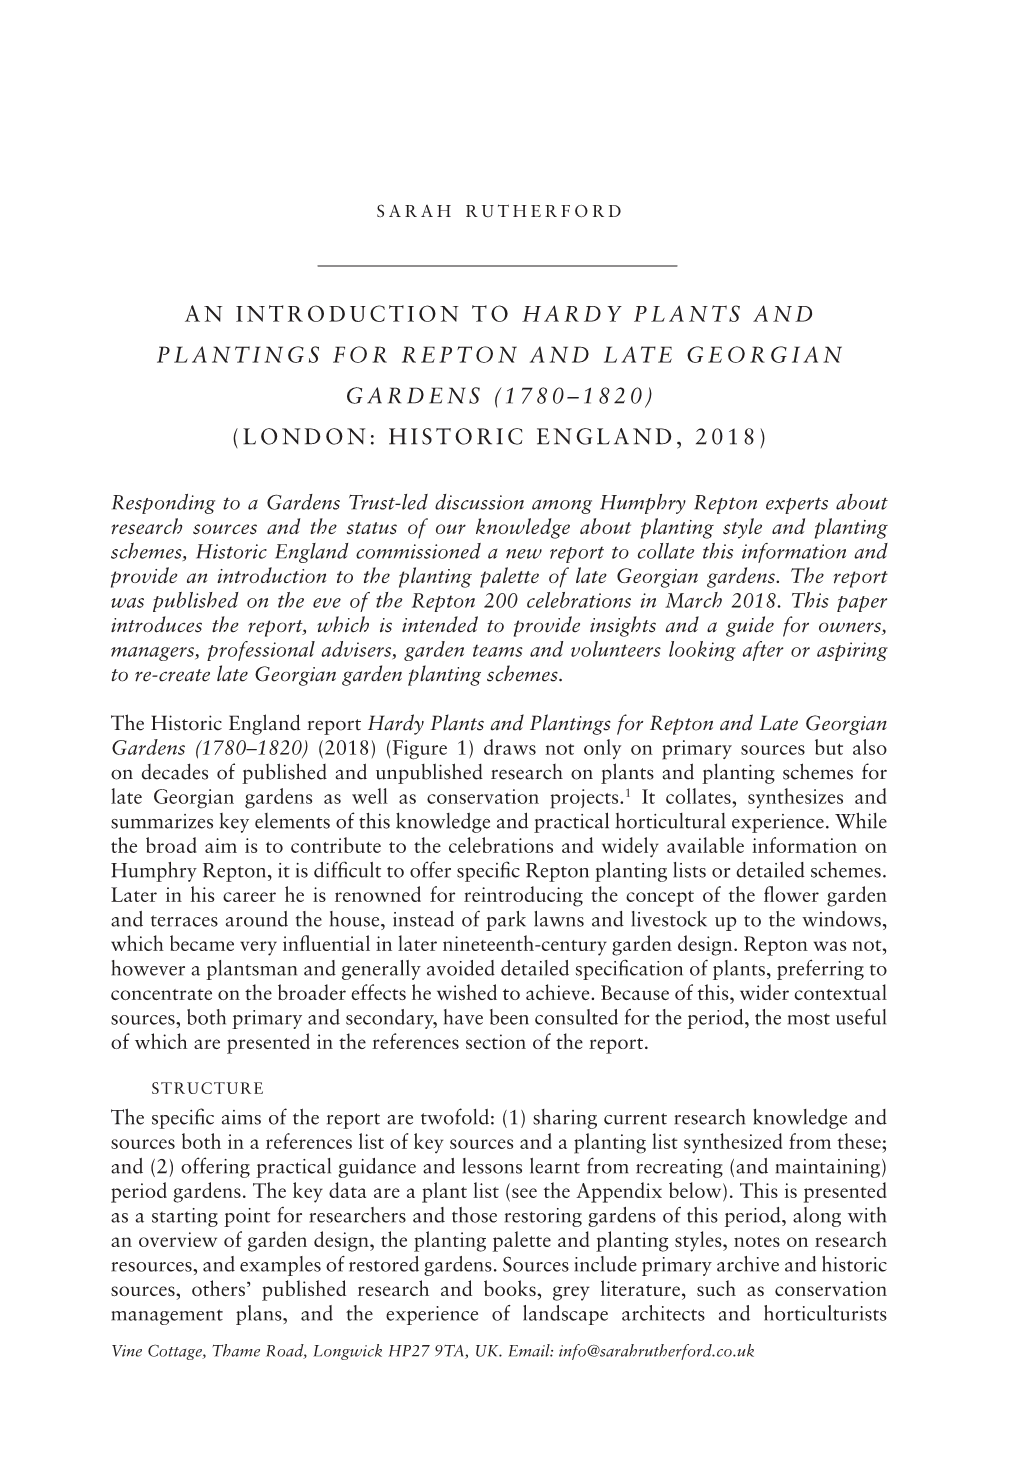 An Introduction to Hardy Plants and Plantings for Repton and LATE